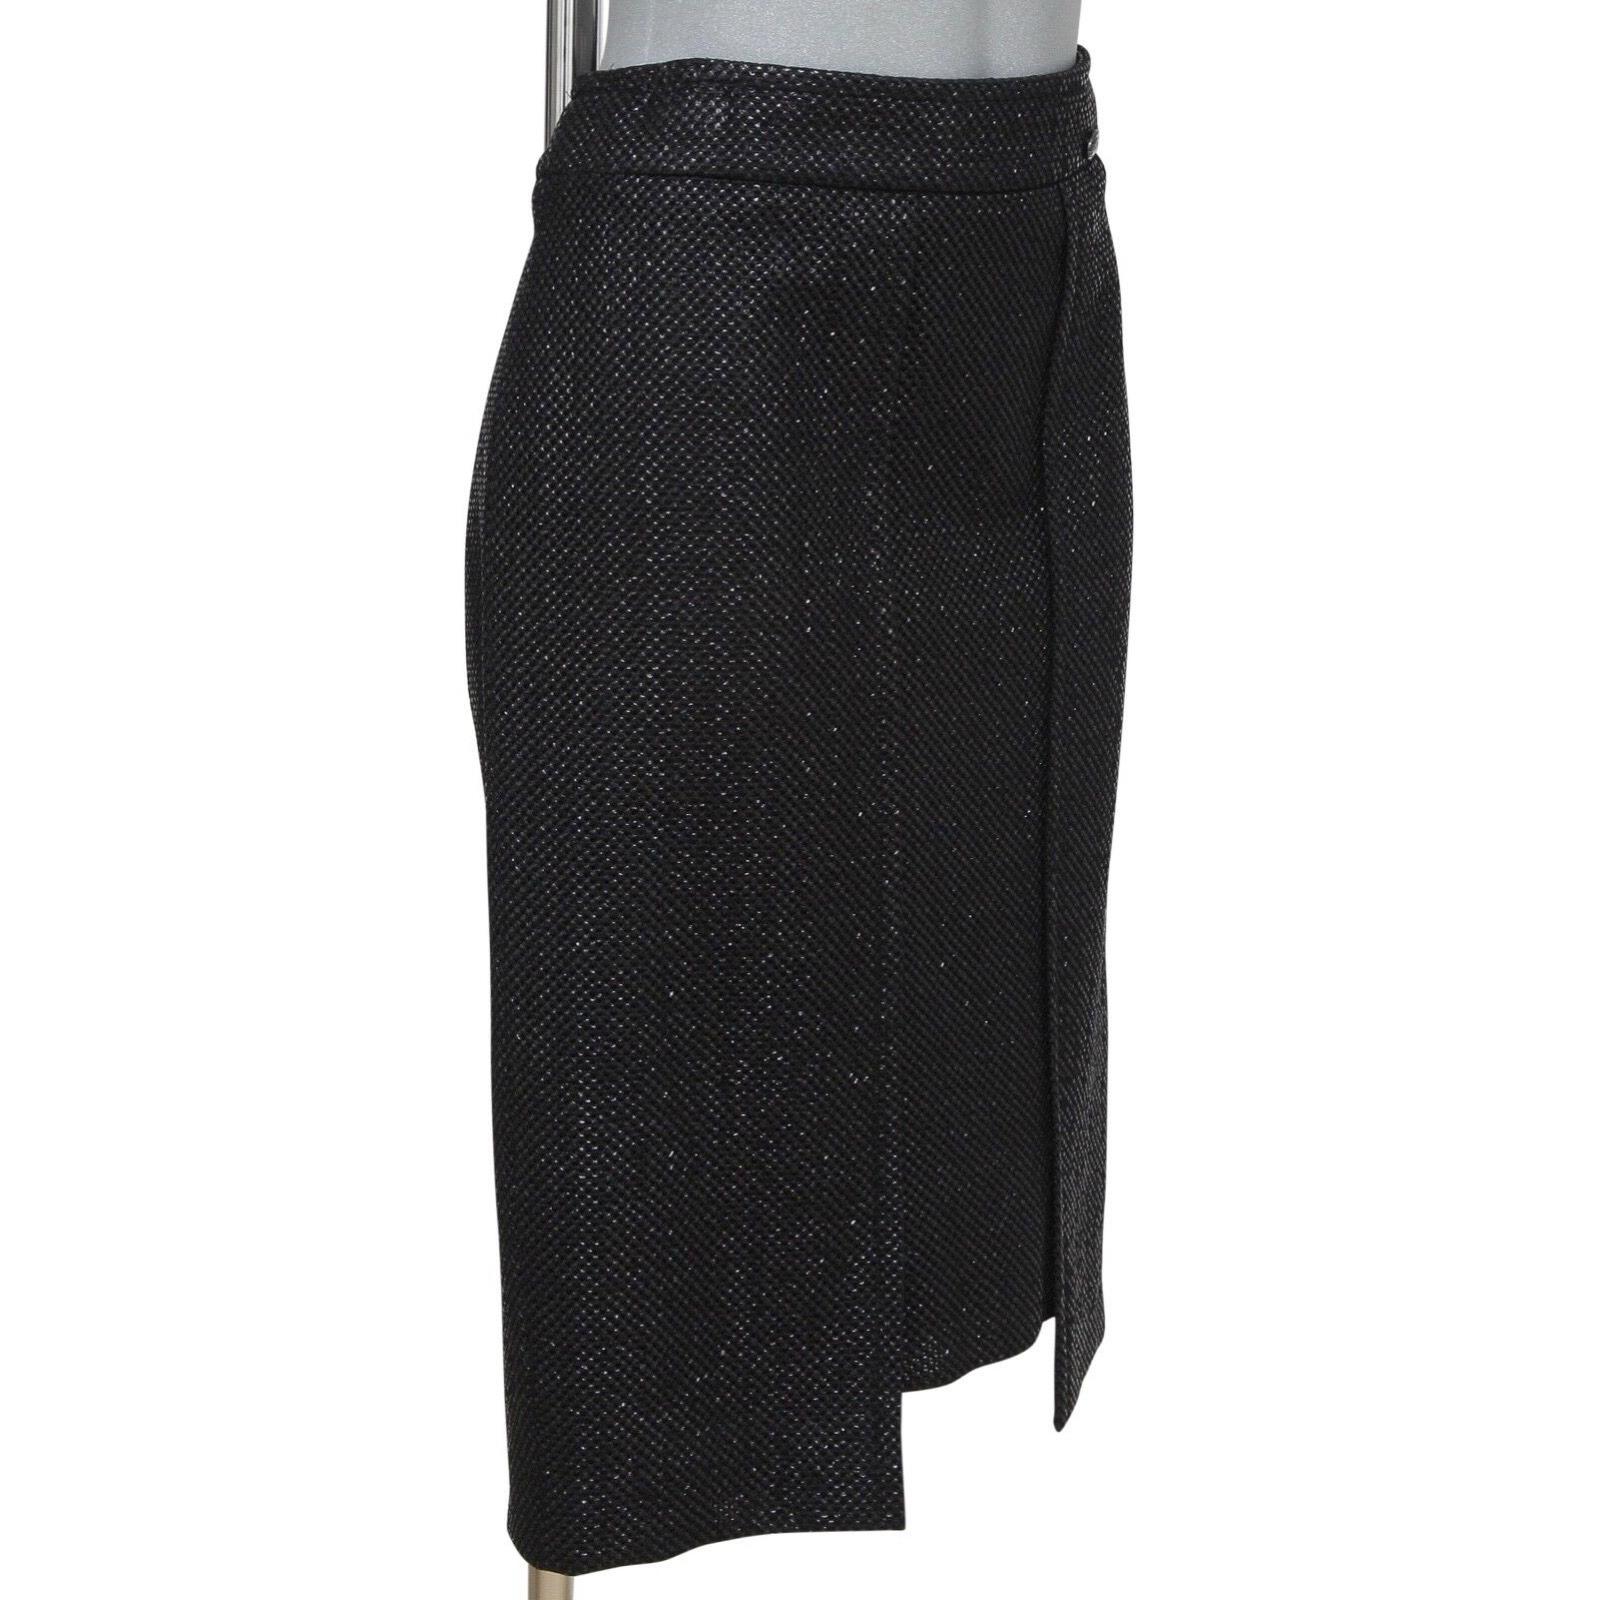 CHANEL Black Skirt Tweed RUNWAY Iridescent Classic Cruise 2011 Sz 44 In Excellent Condition For Sale In Hollywood, FL